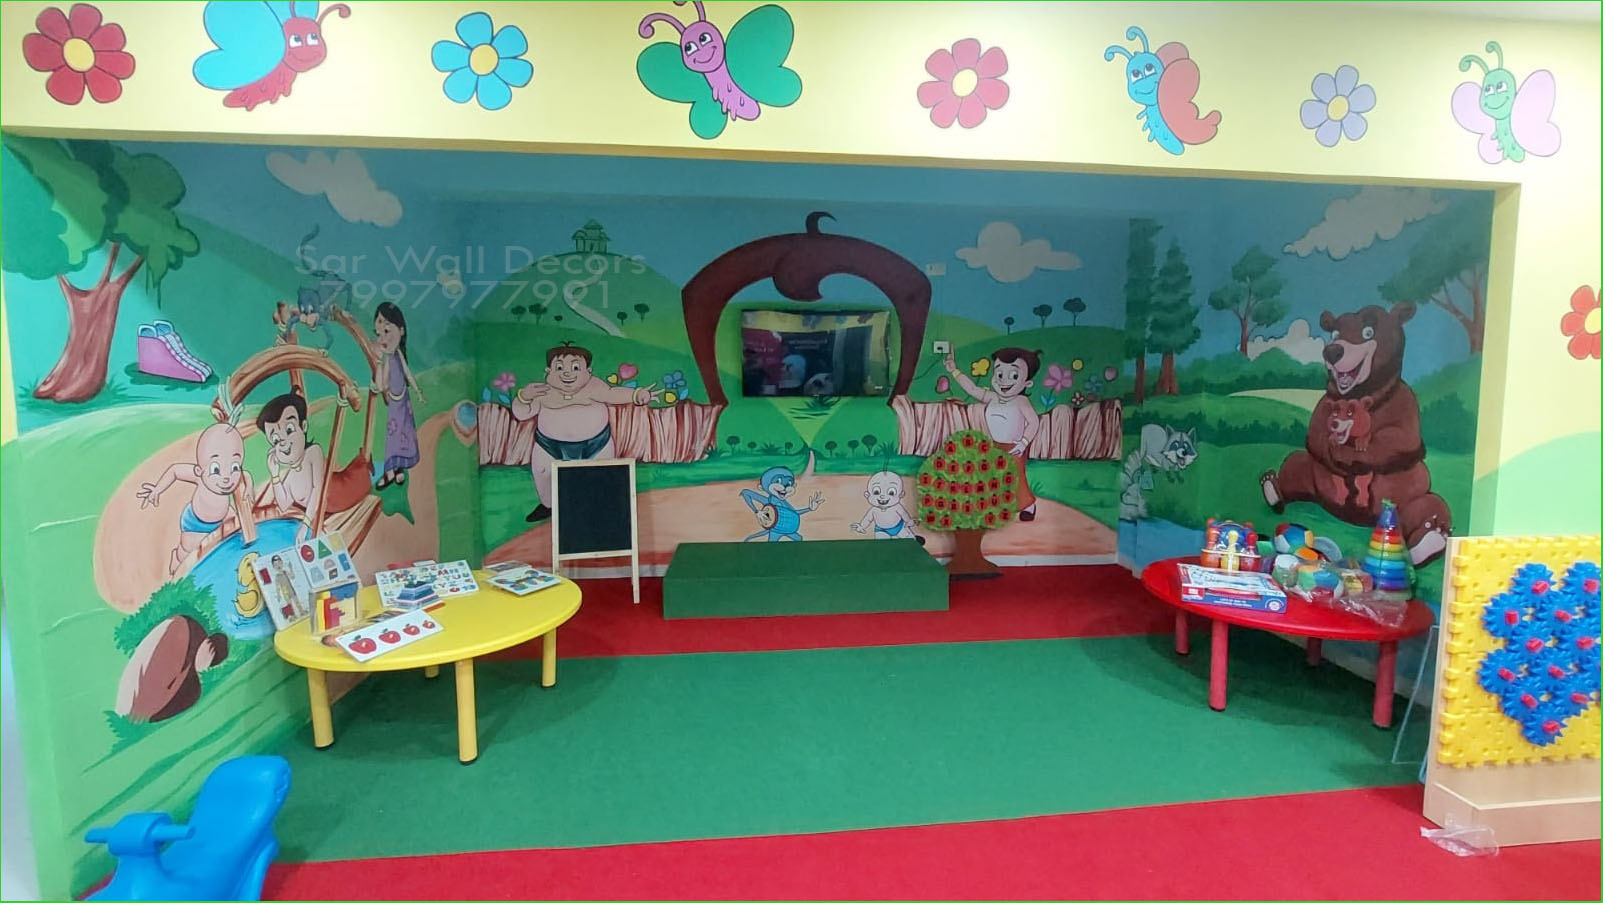 Play School Wall Painting From MadhapurServicesInterior Designers - ArchitectsAll Indiaother